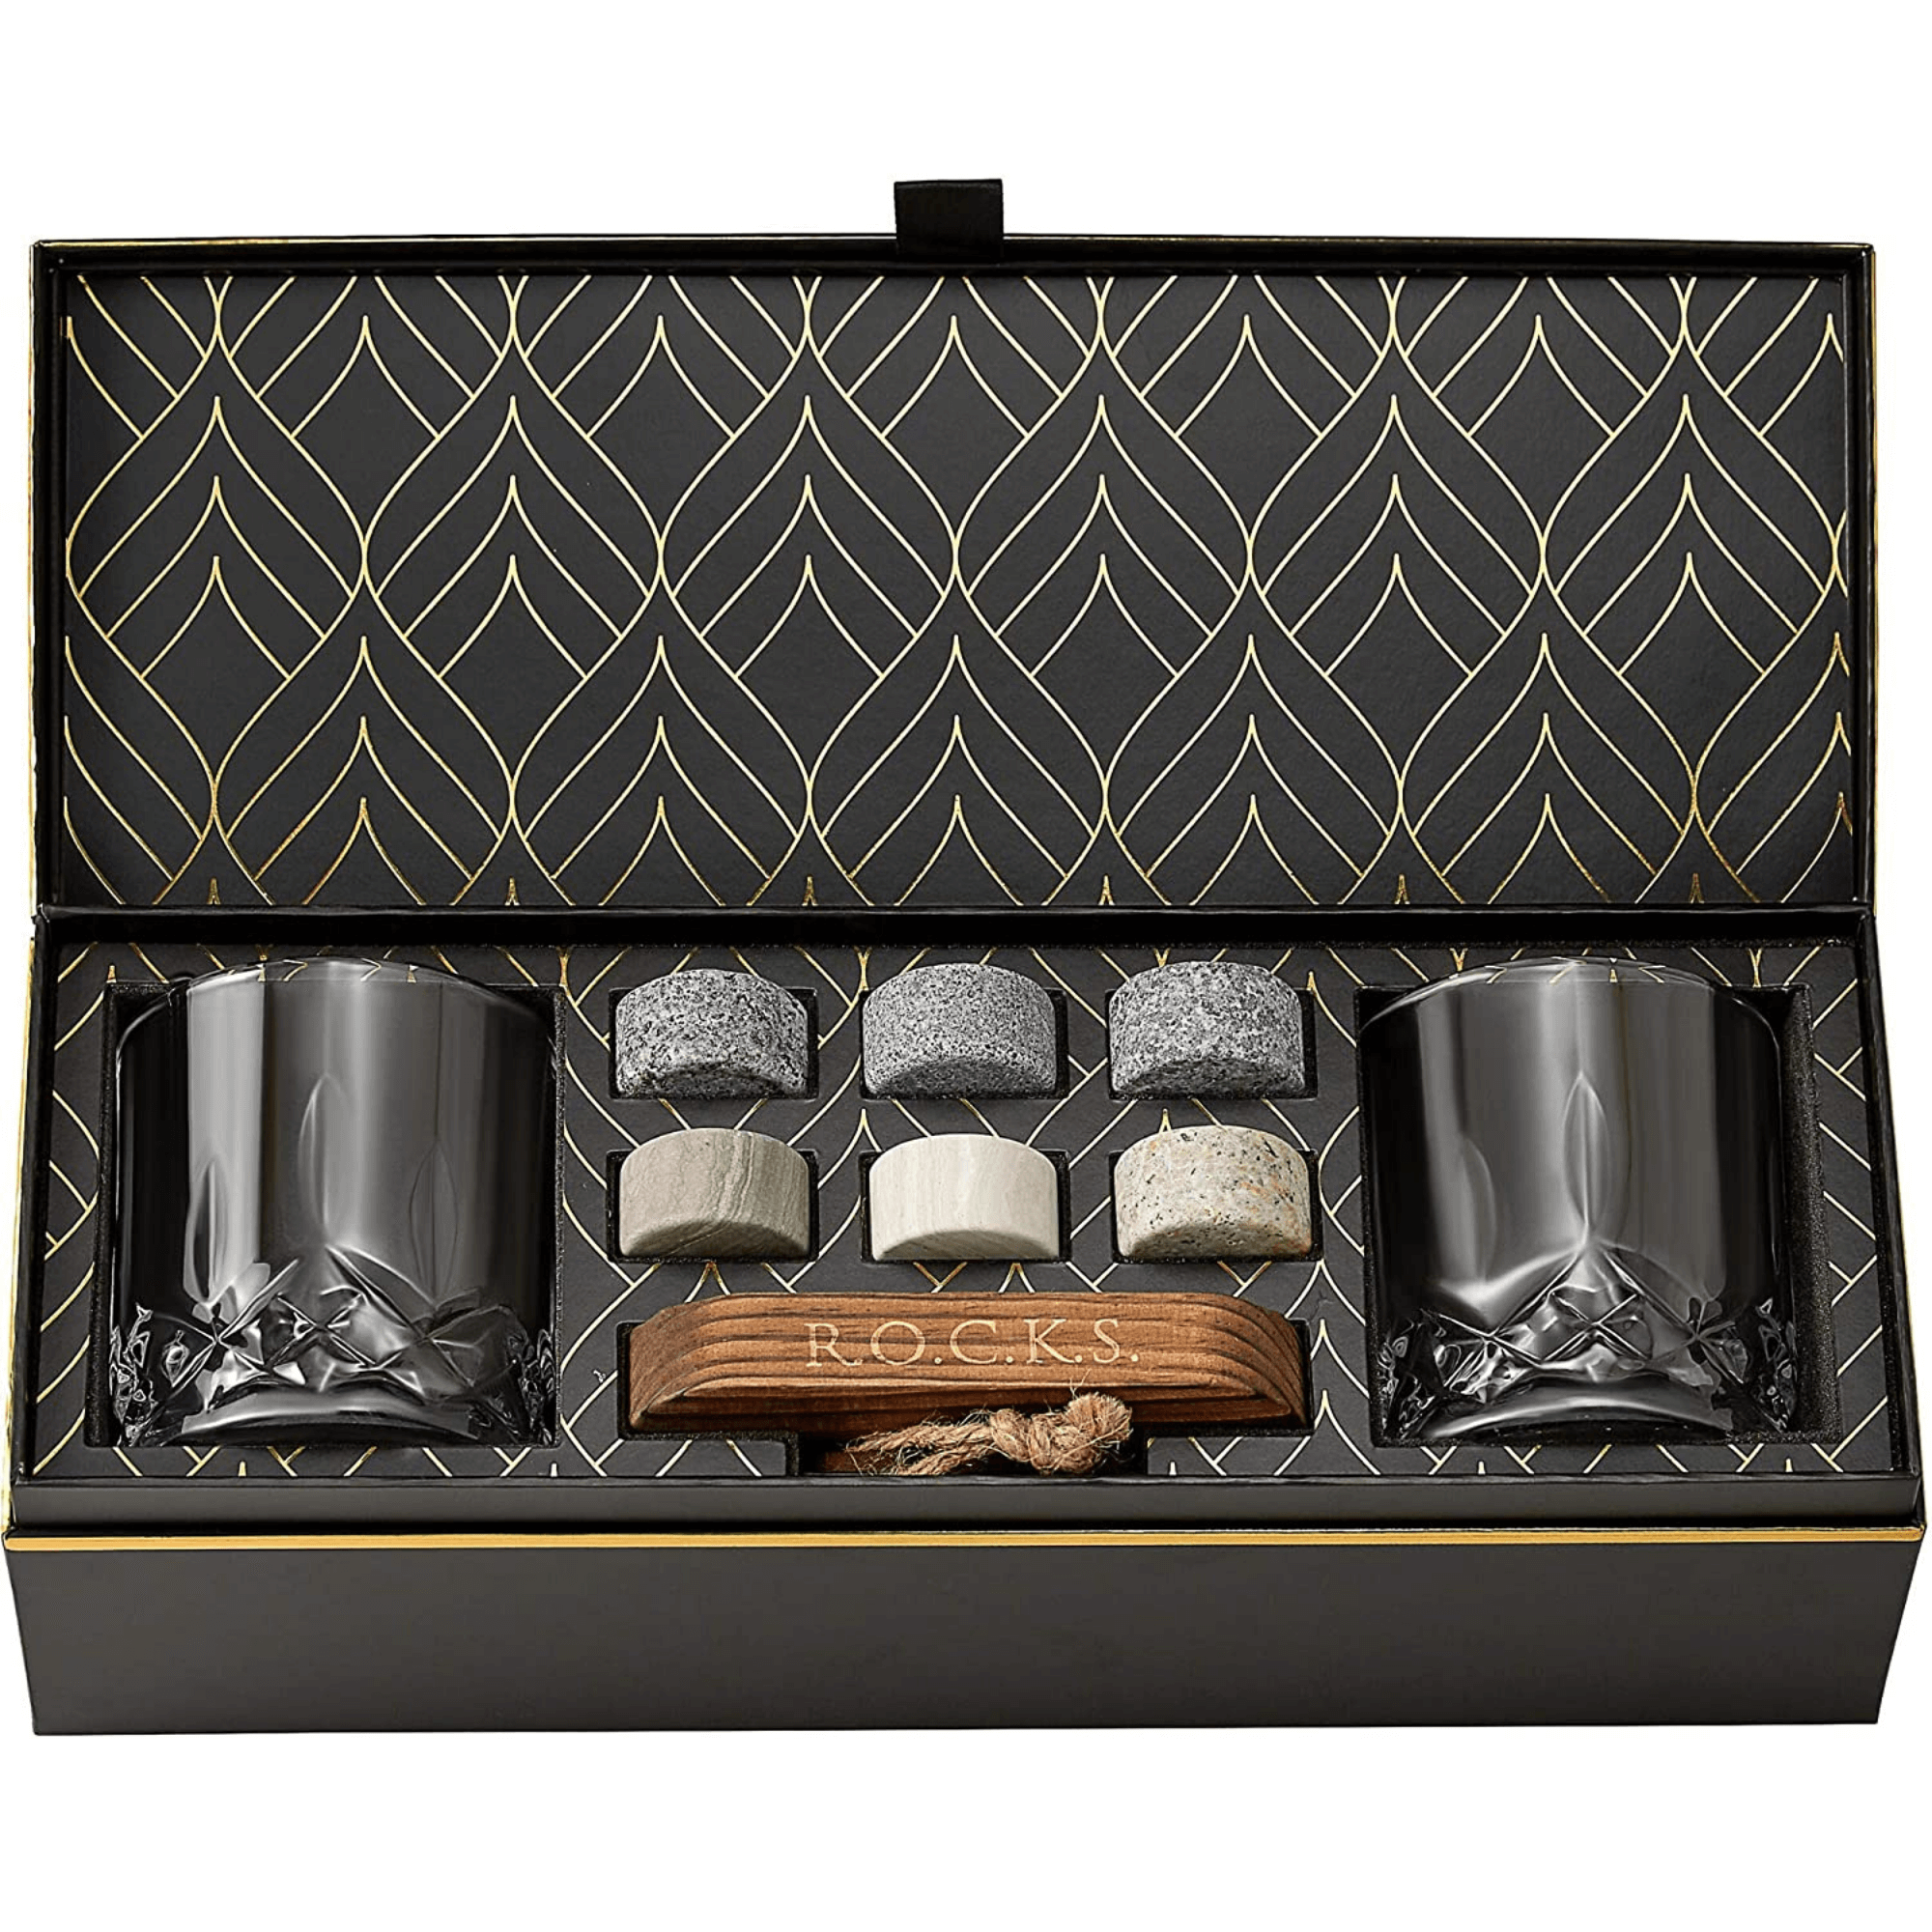 Alkenny Whiskey Gift Set Whiskey Stones and Whiskey Glasses Set of 2 With  Free Gift Bag Included. 